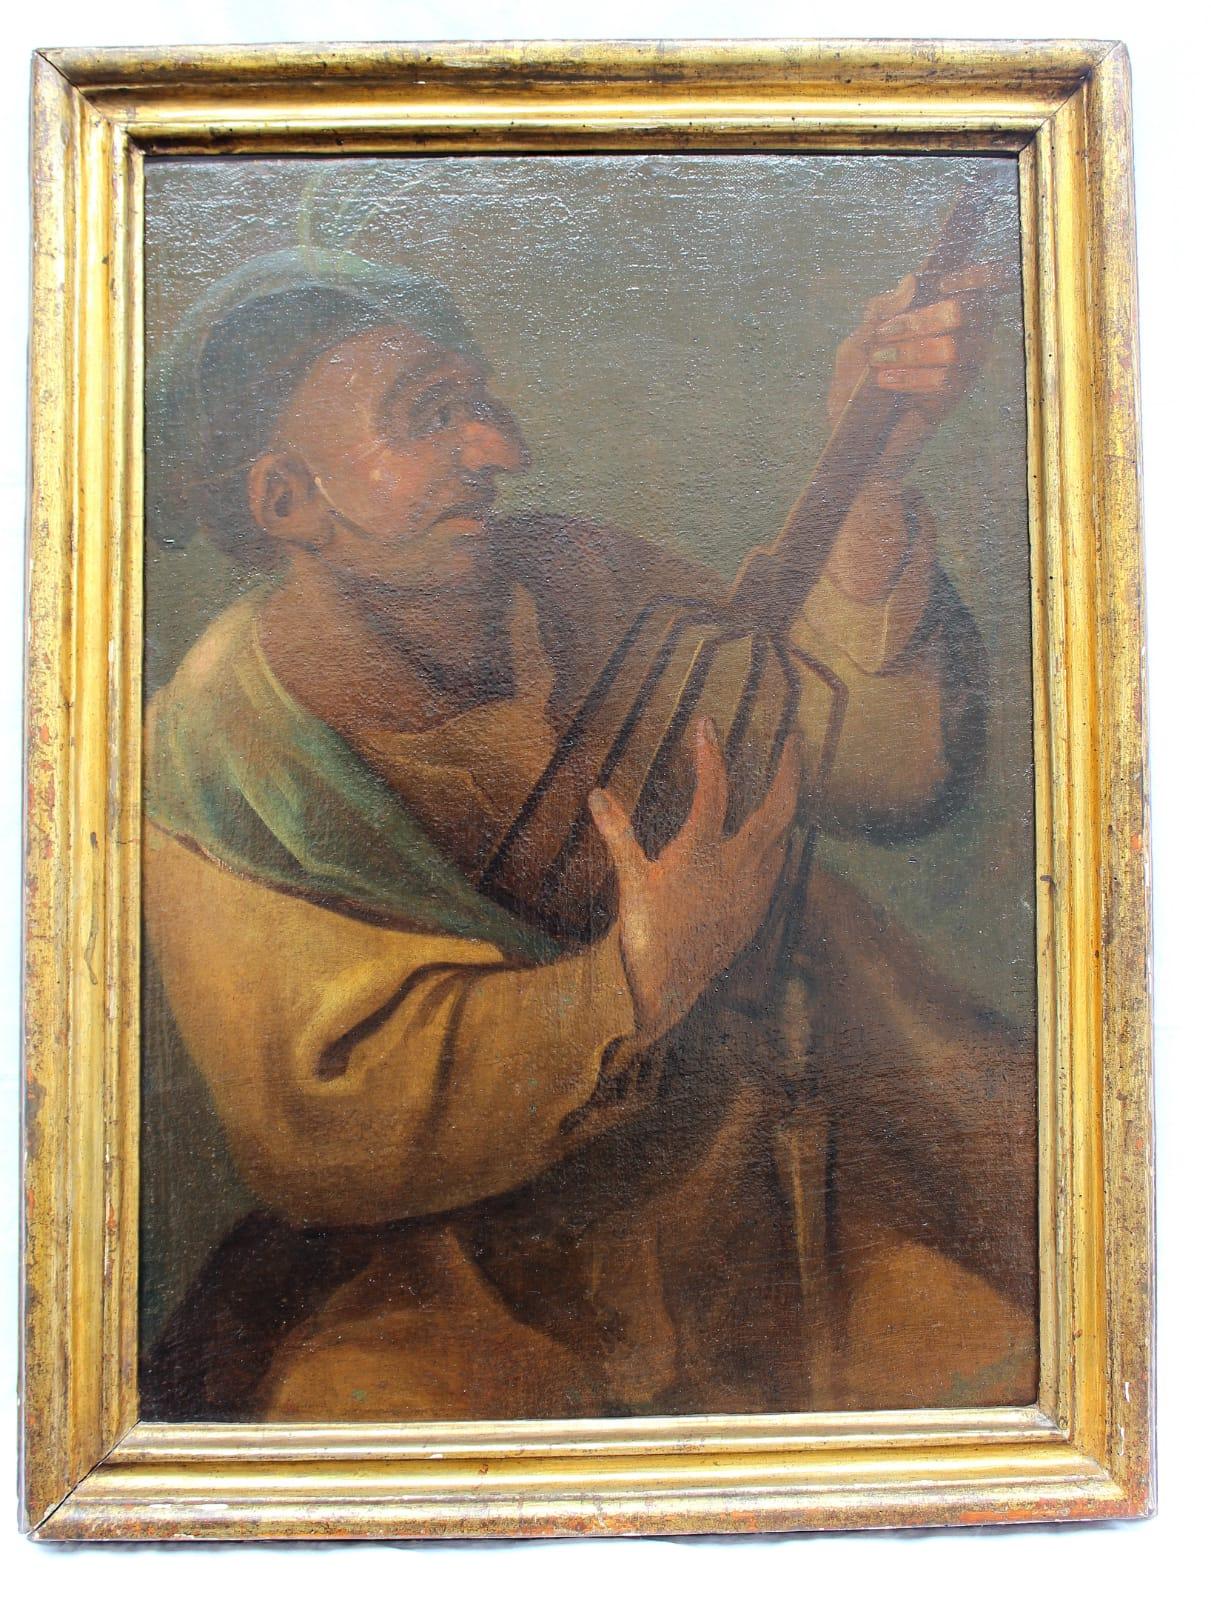 Wood Italian School 17th Century Oil Painting The Musician For Sale